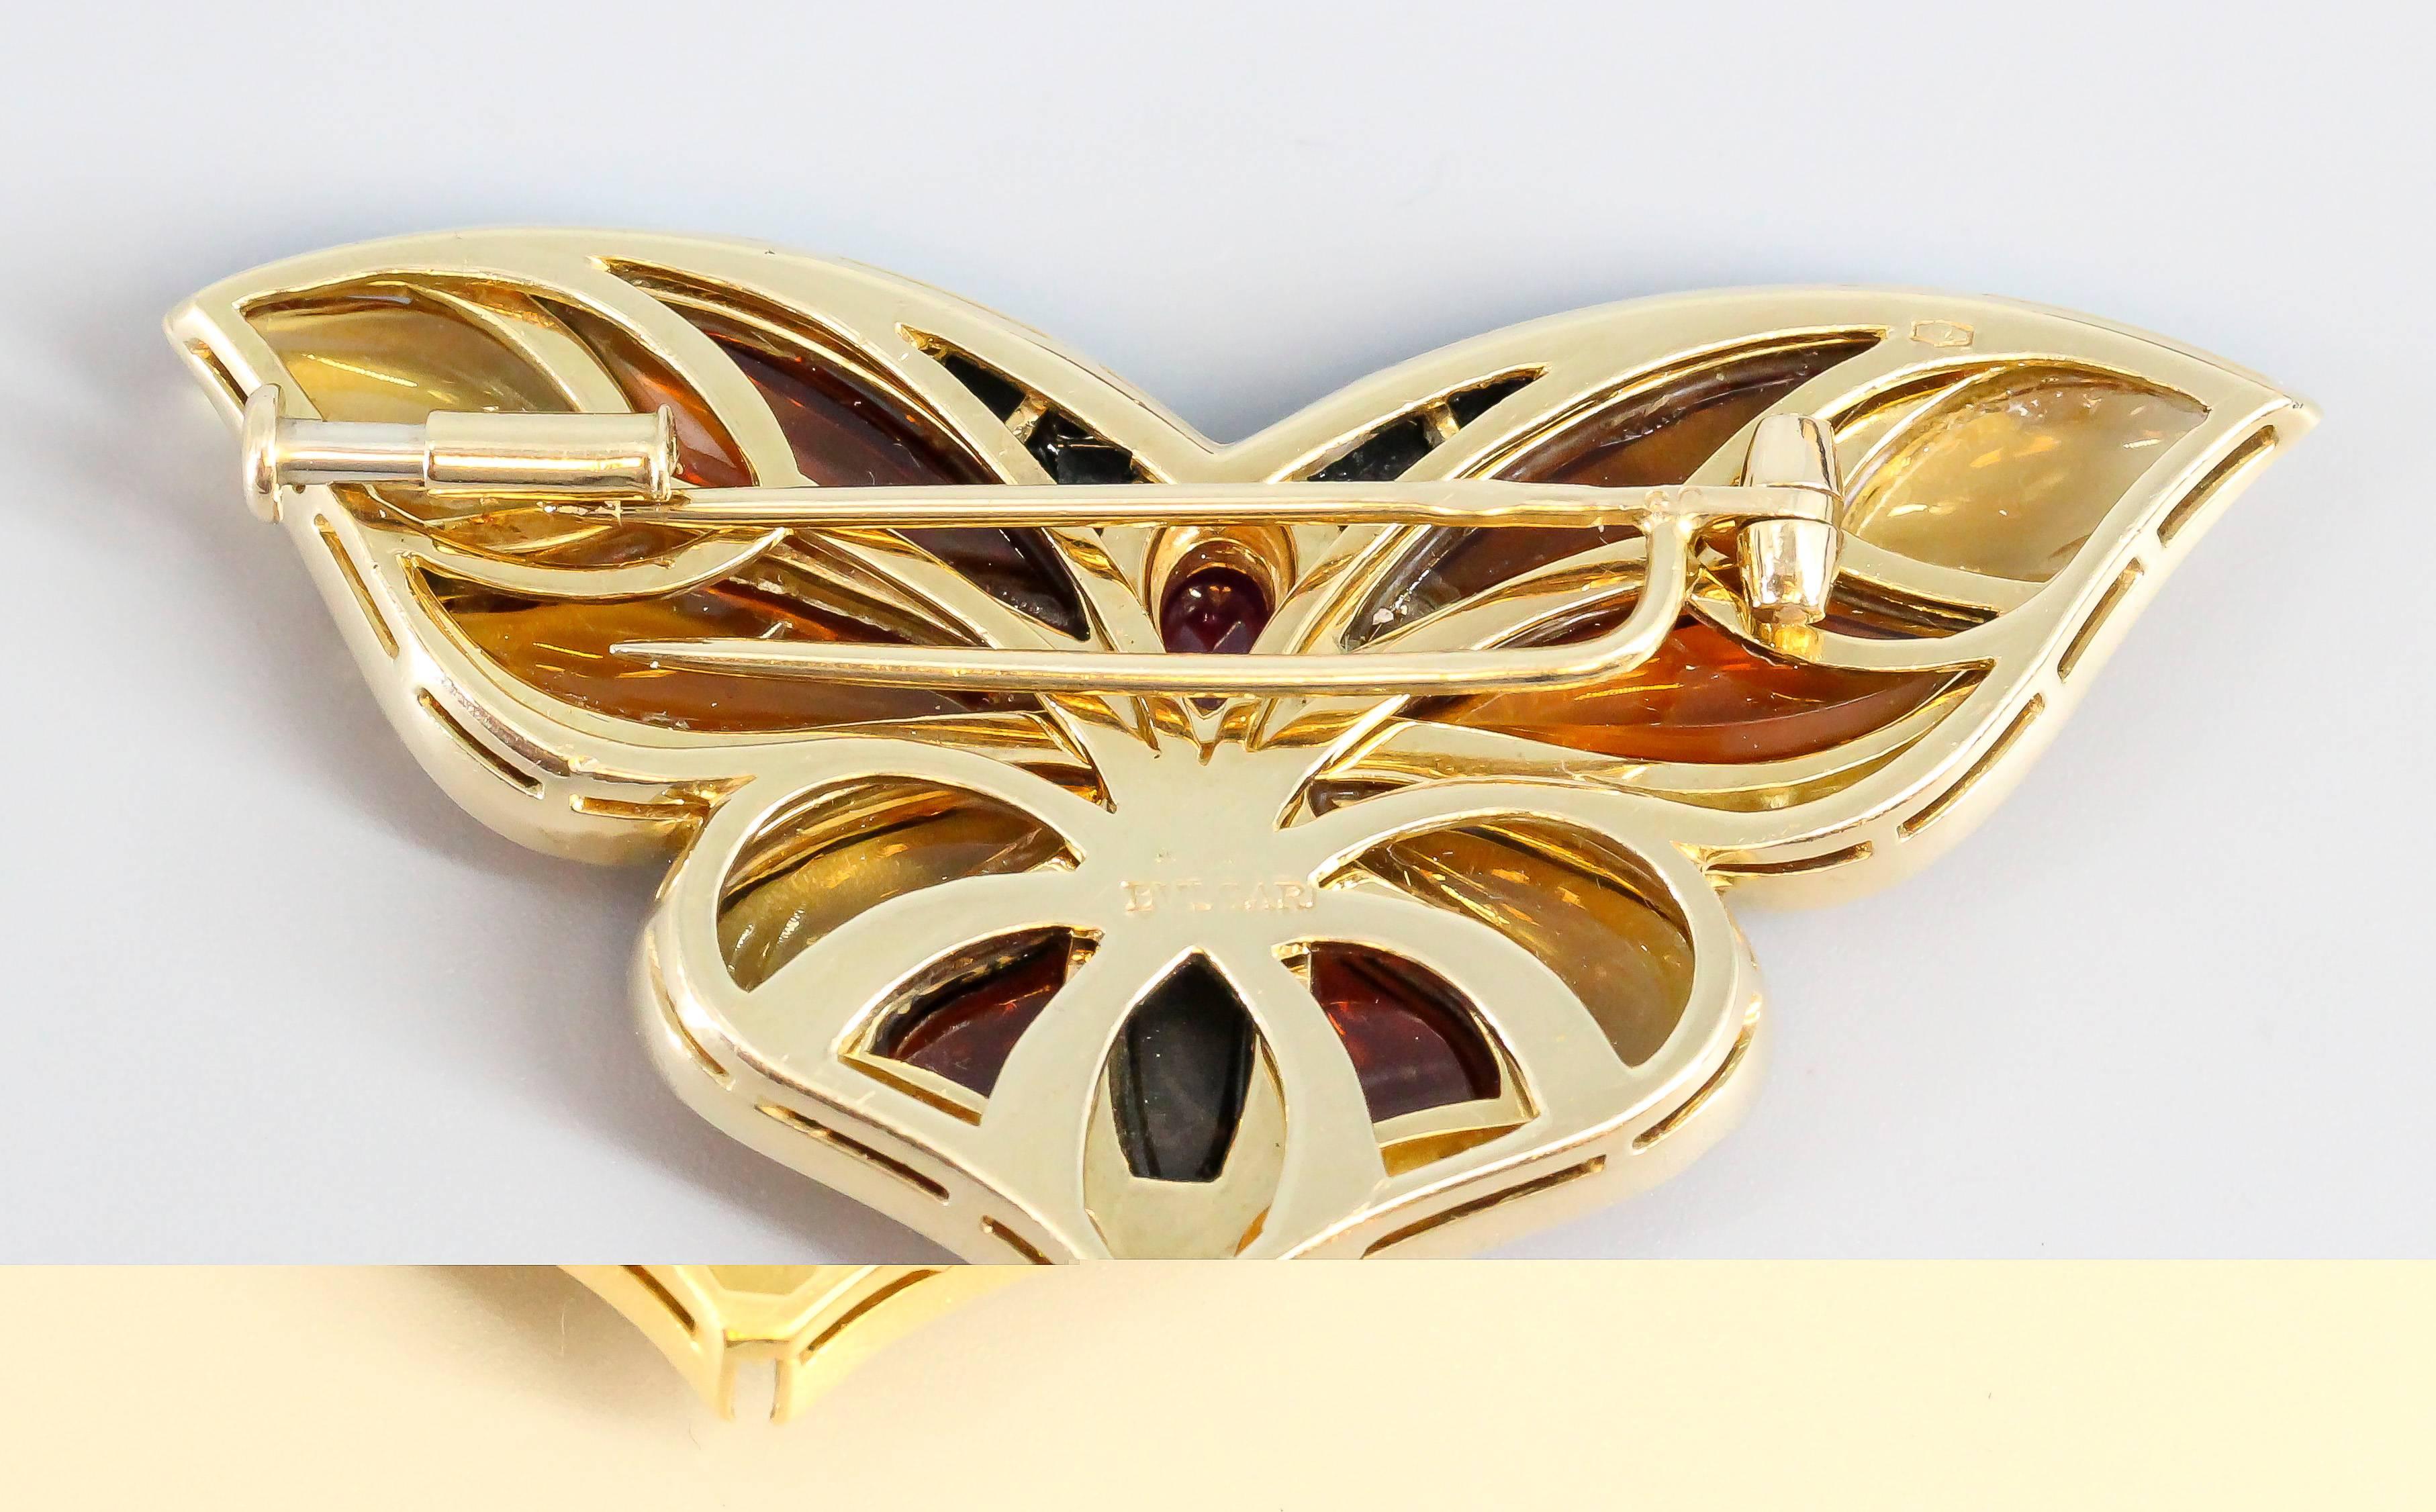 Whimsical diamond, ruby, onyx, citrine and 18K yellow gold brooch by Bulgari, circa 1980s. It resembles the likeness of a butterfly. Also features high grade round brilliant cut diamonds along the ends of the wings. Highly wearable and beautifully